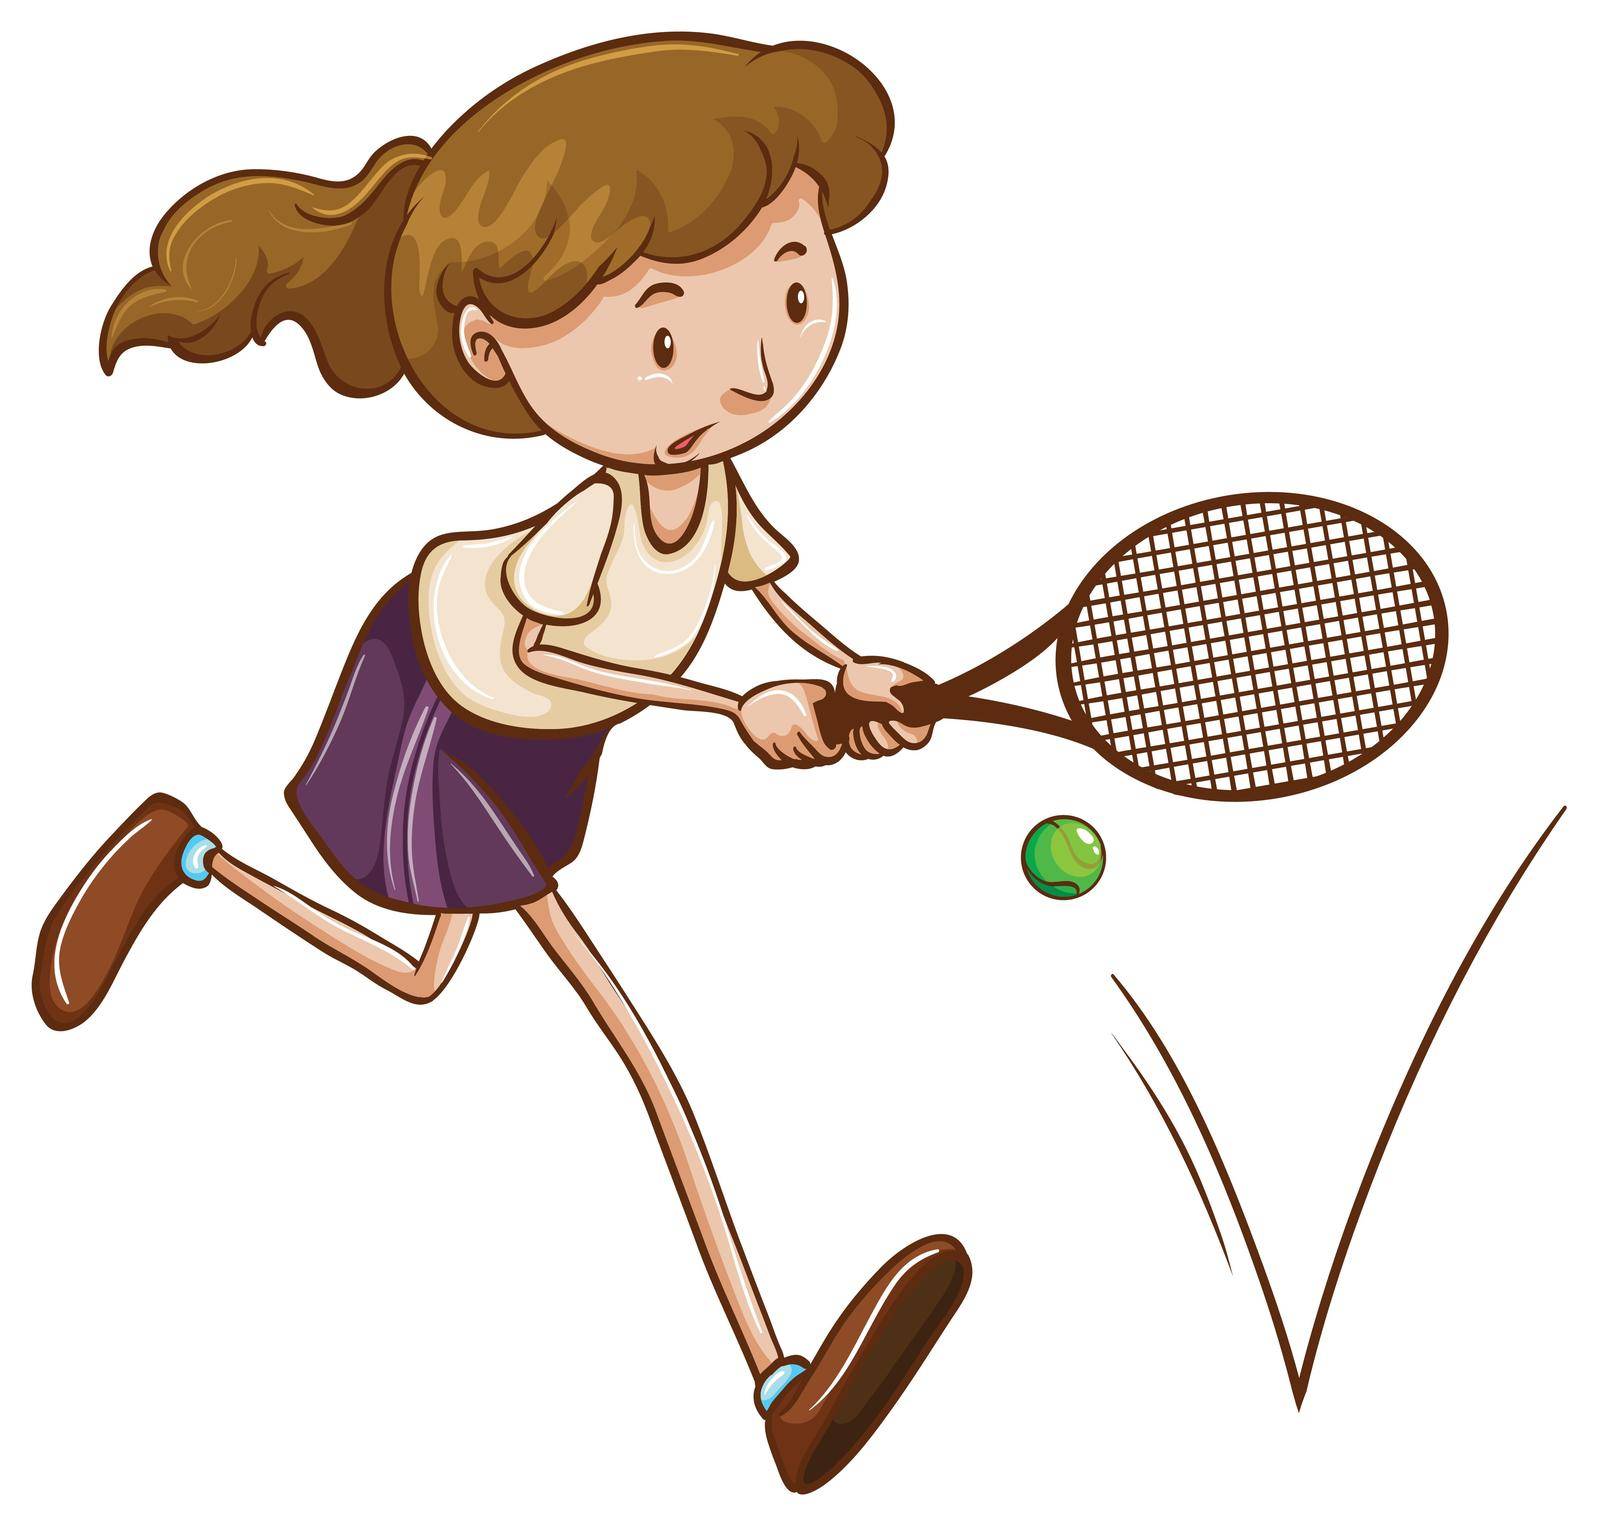 A simple sketch of a girl playing tennis by iimages